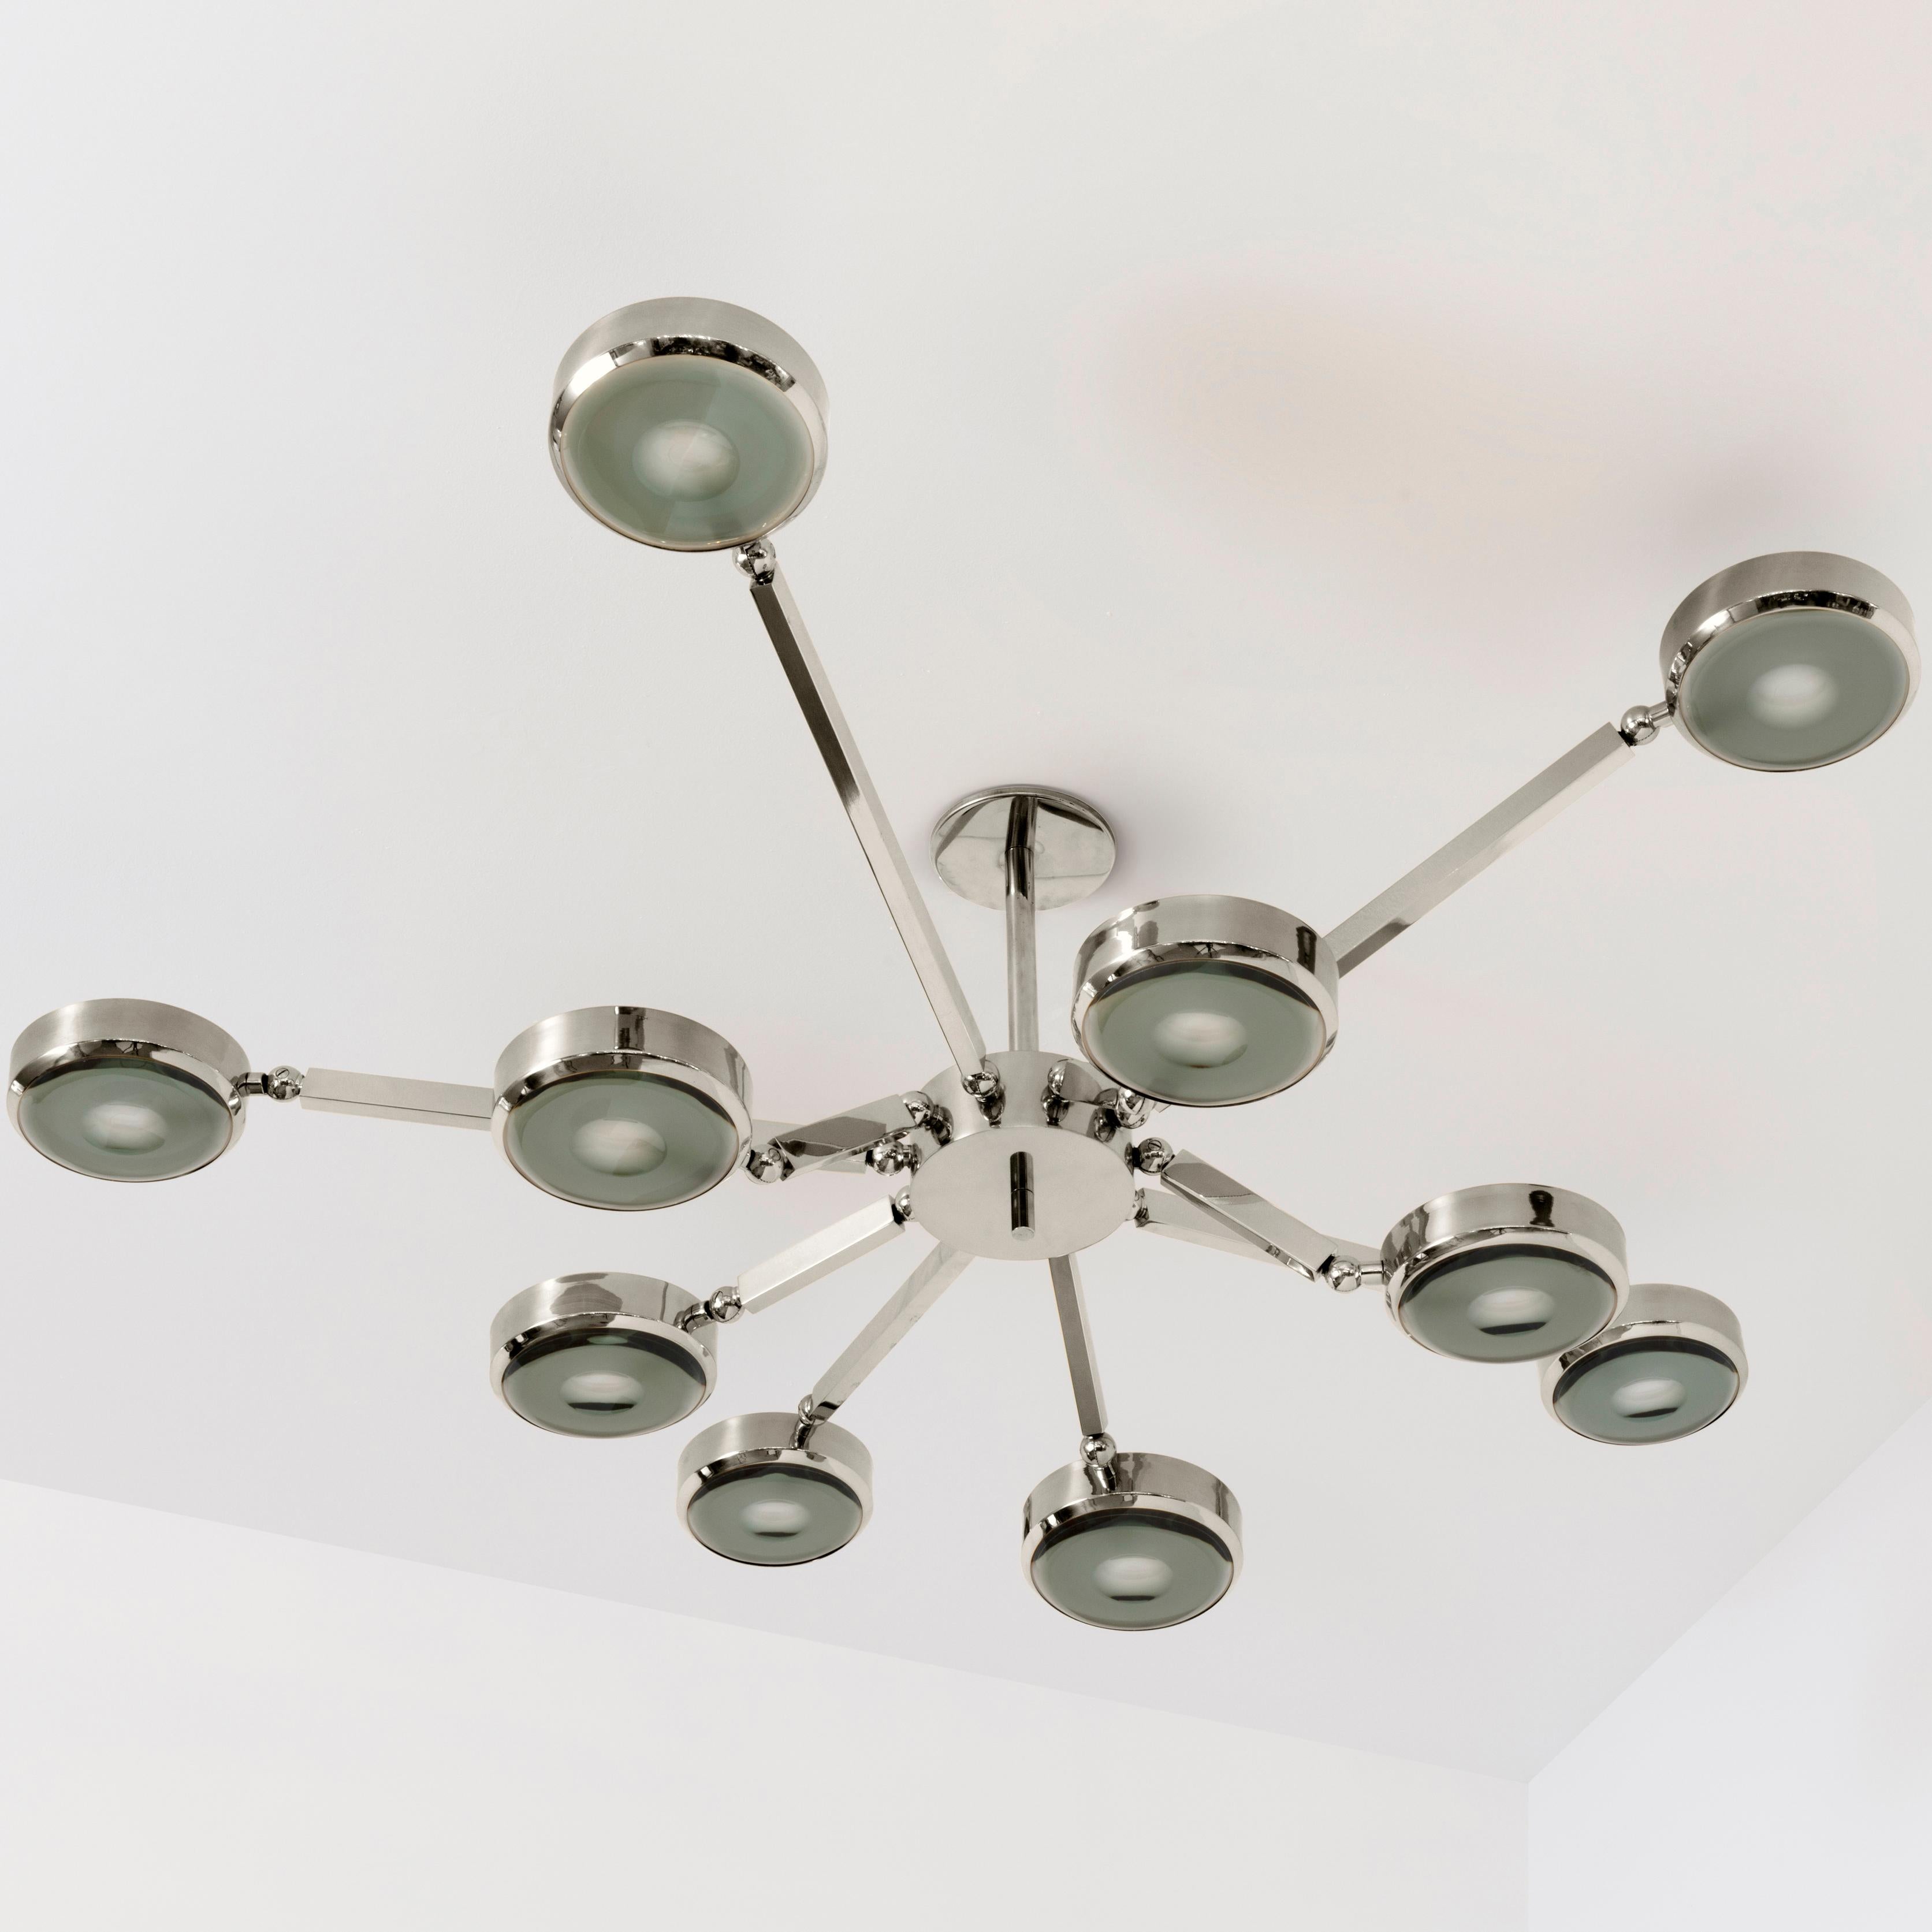 Modern Oculus Articulating Ceiling Light-Polished Nickel Finish and Carved Glass For Sale